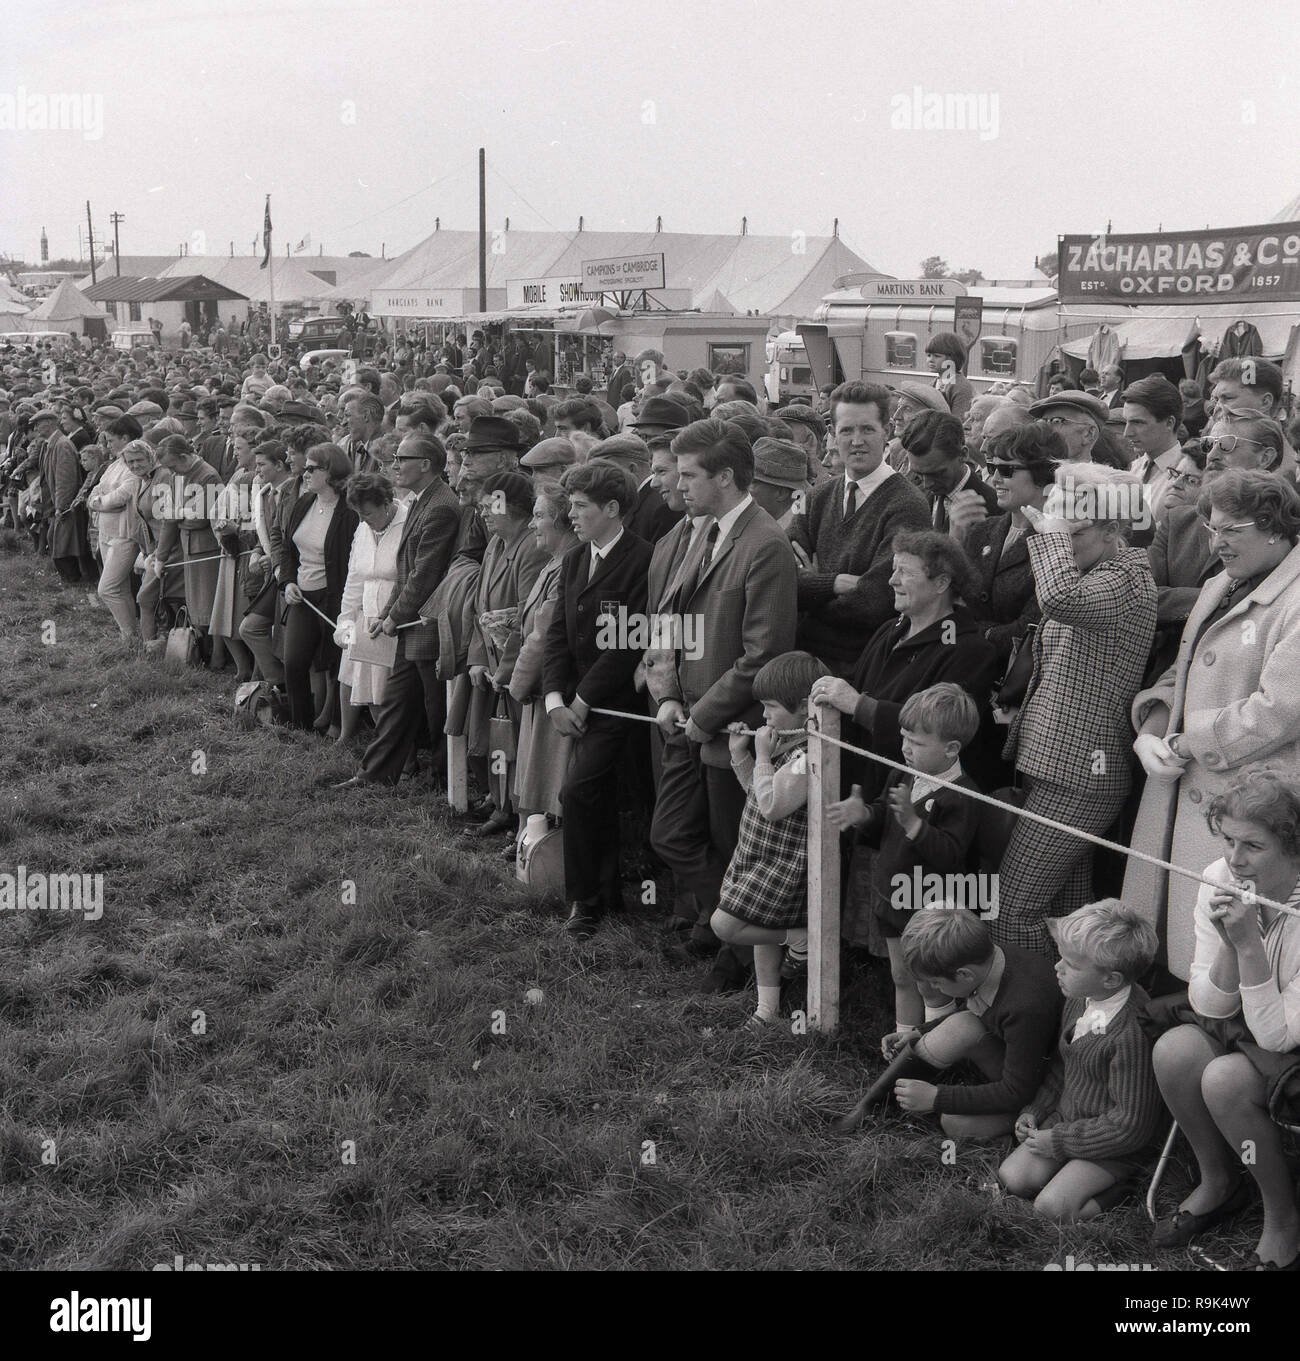 1967, visitors to the Thame Show, Oxfordshire, the largest one-day agricultural show in Britain, standing in a field watching the proceedings, England, UK. Stock Photo